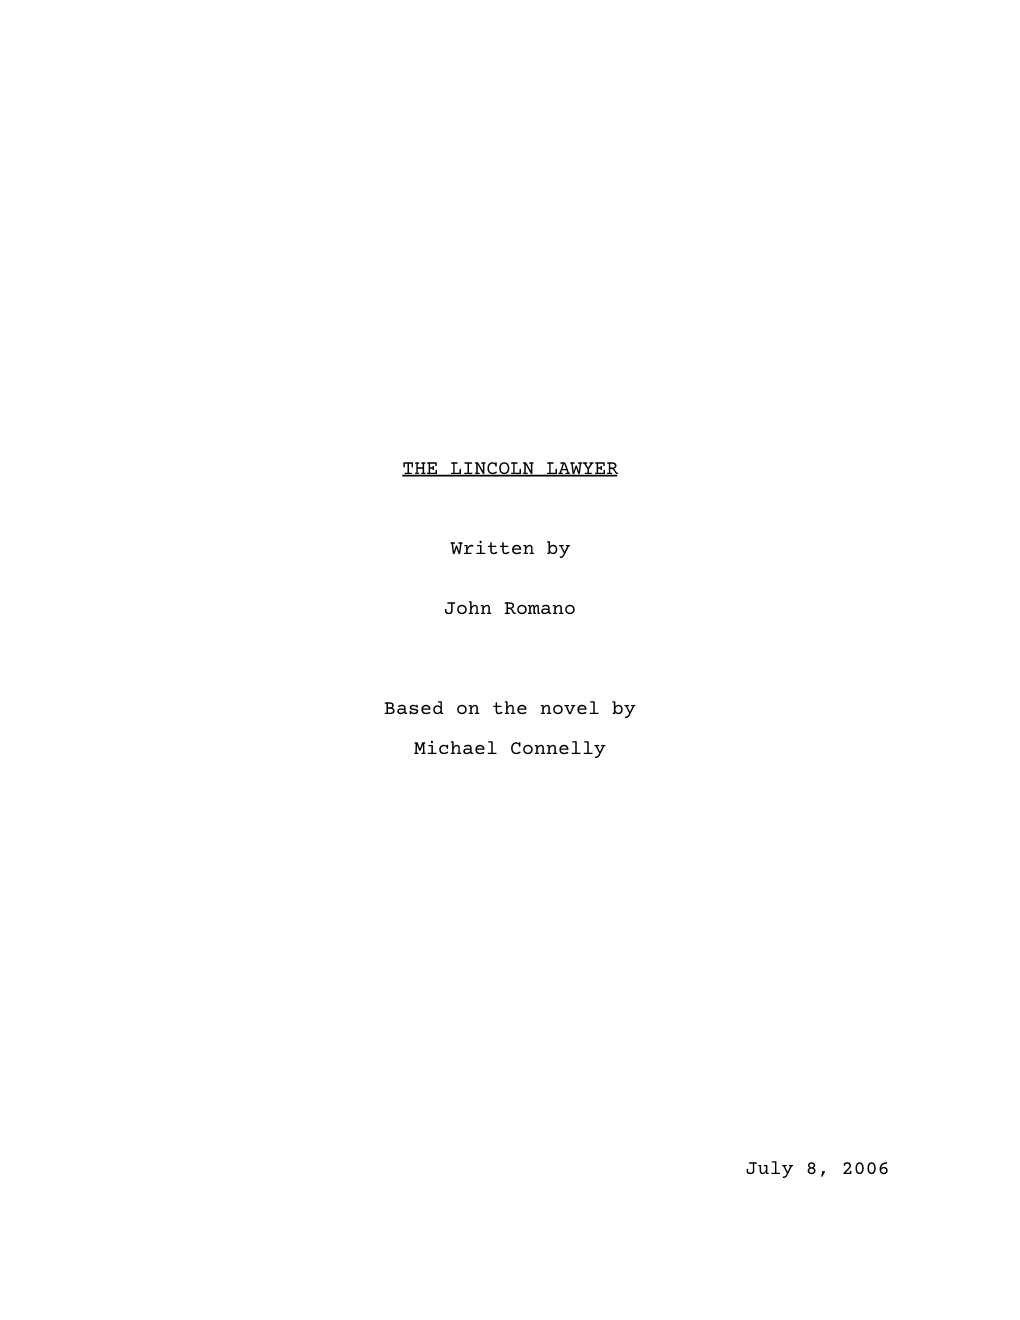 THE LINCOLN LAWYER Written by John Romano Based on the Novel